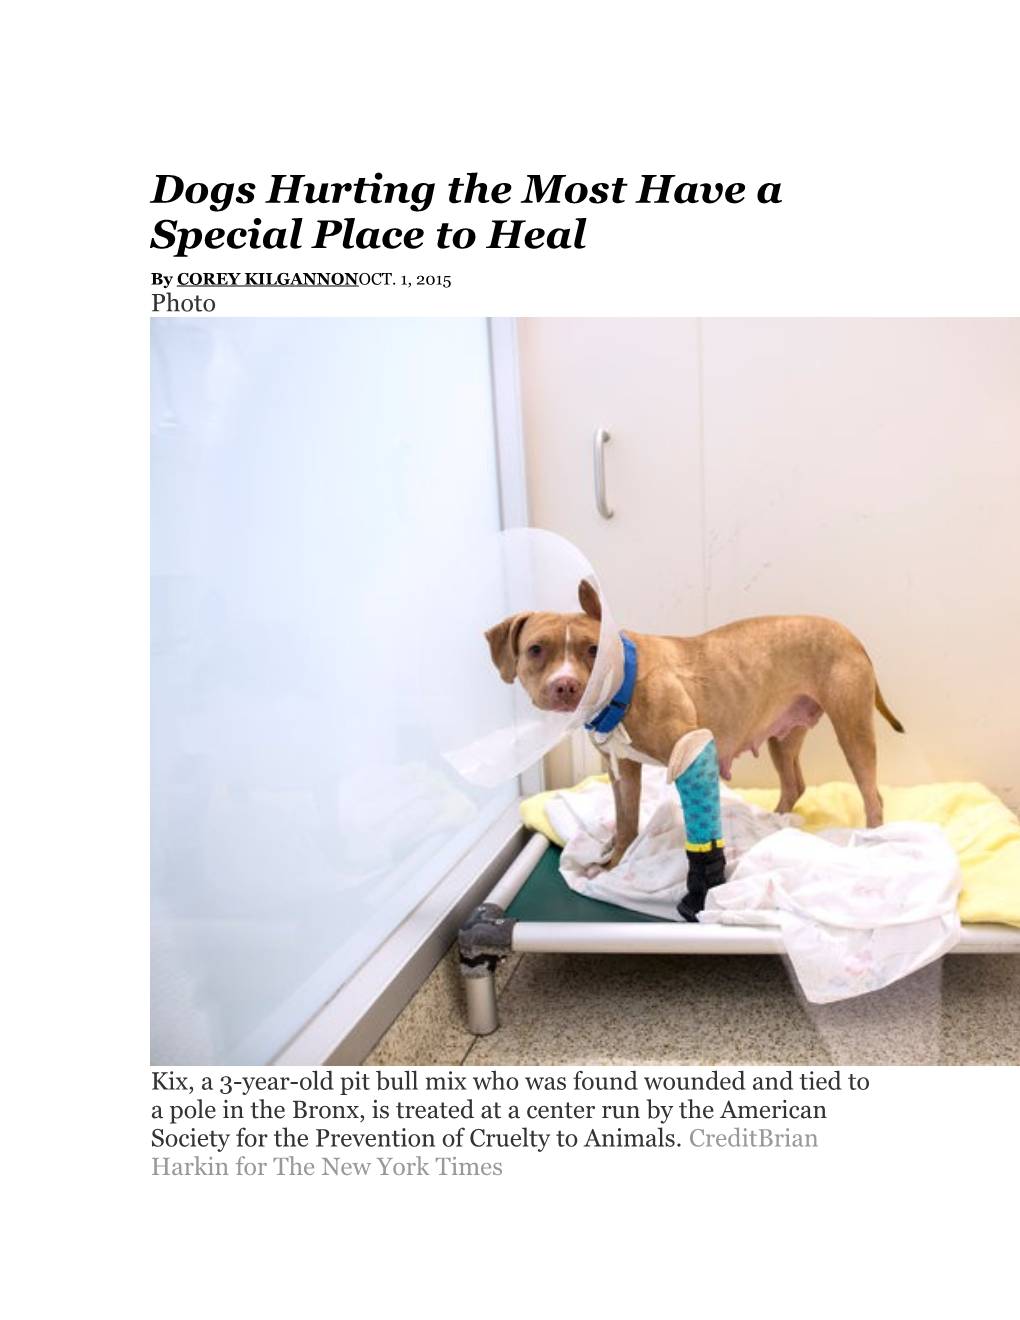 Dogs Hurting the Most Have a Special Place to Heal